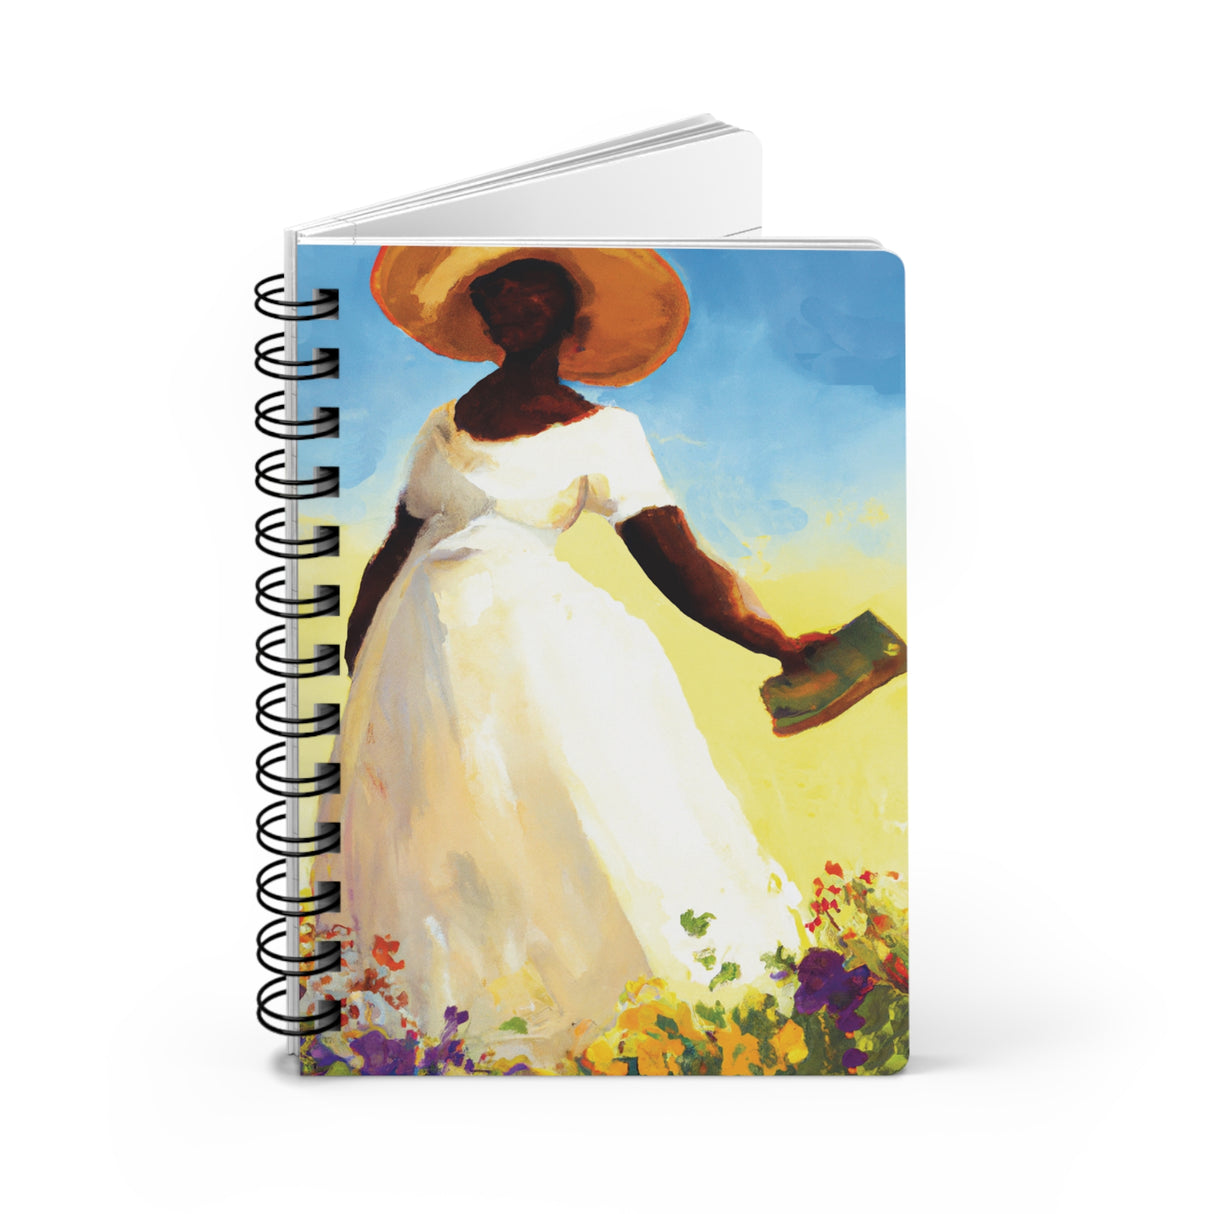 The Word Spiral Bound Journal & Notebooks with 2023 -2024 Year-at-a-glance calendar